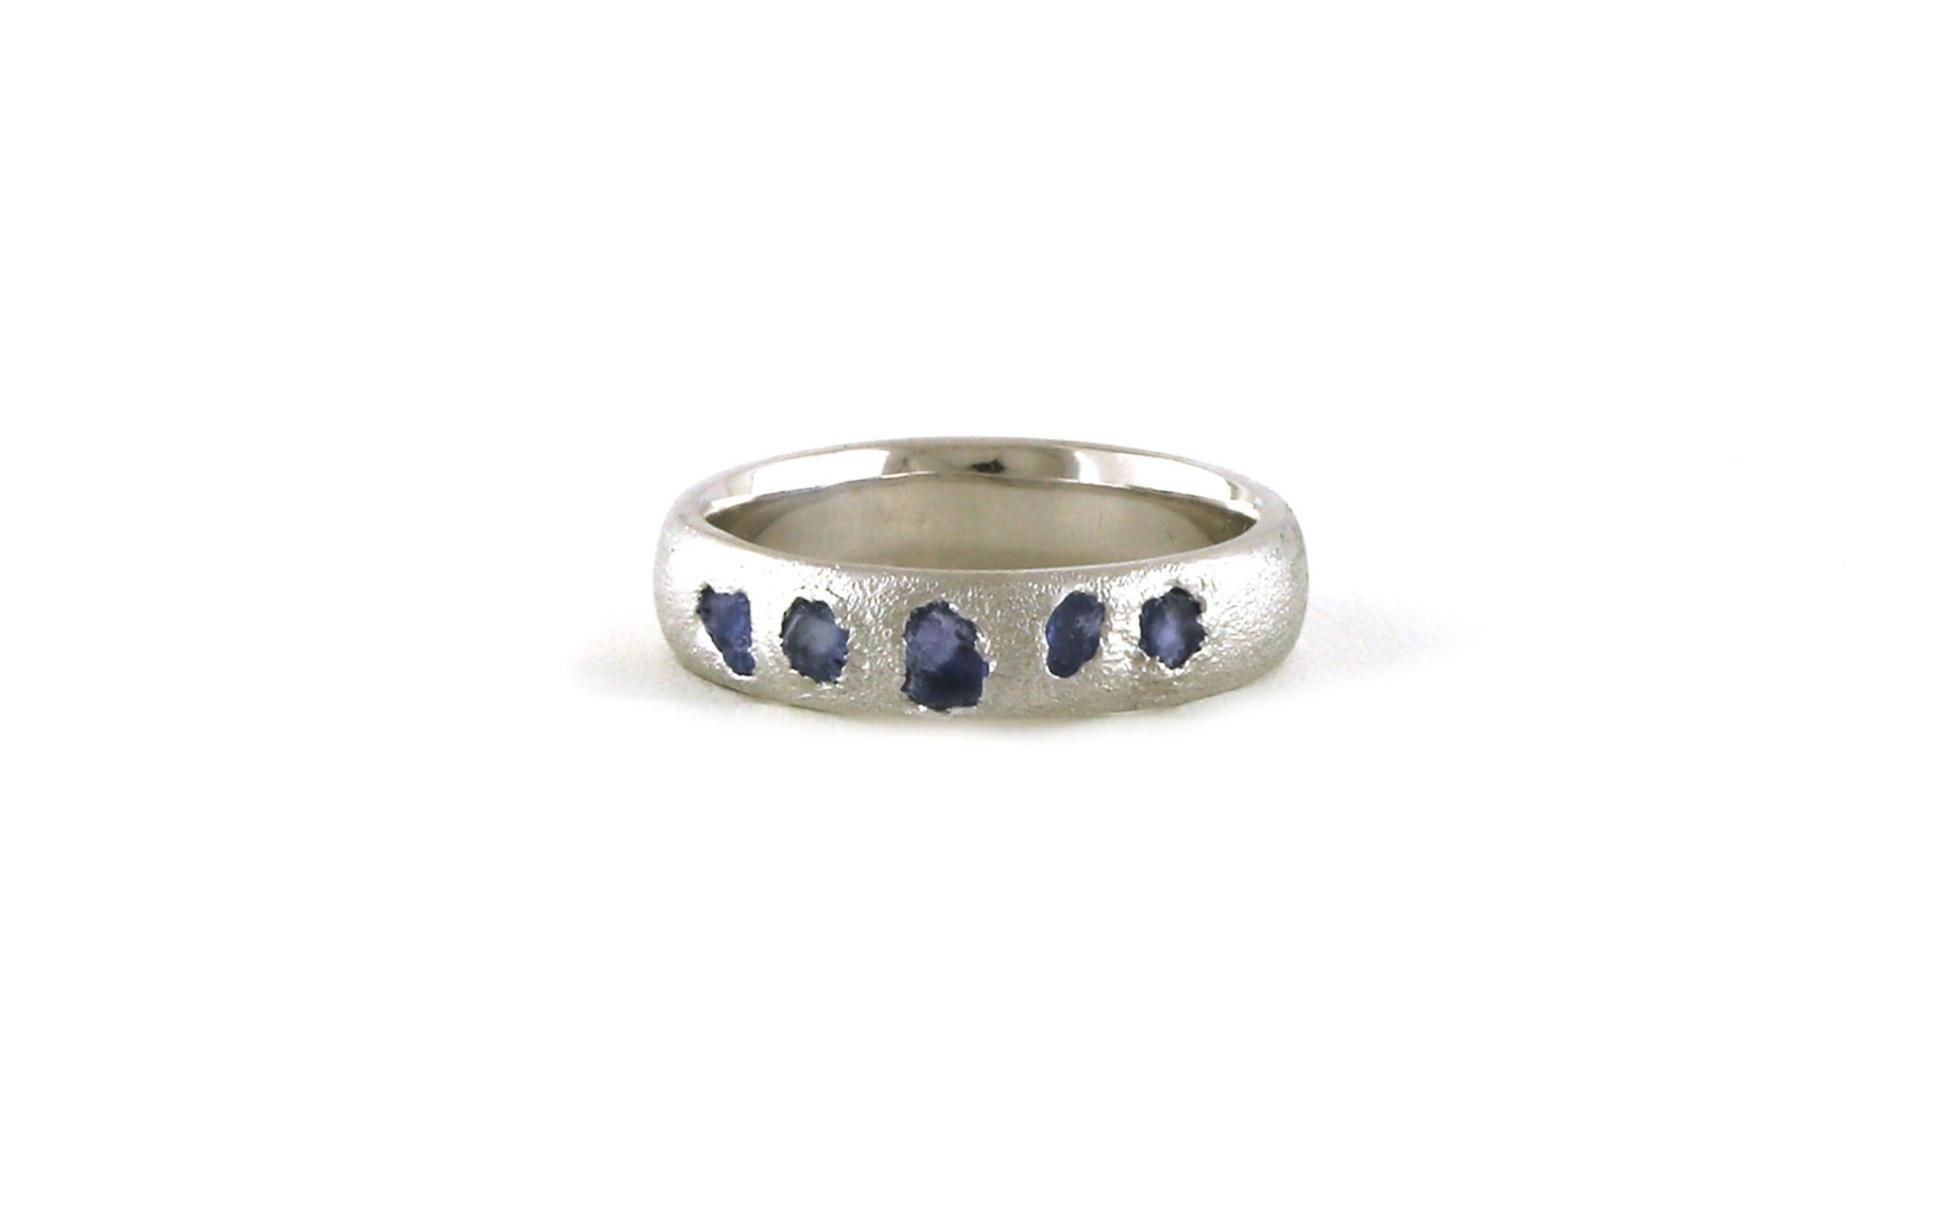 5-Stone Flush-set Raw Un-cut Montana Yogo Sapphire Ring with Diamond Finish Texture in White Gold (0.80cts TWT)